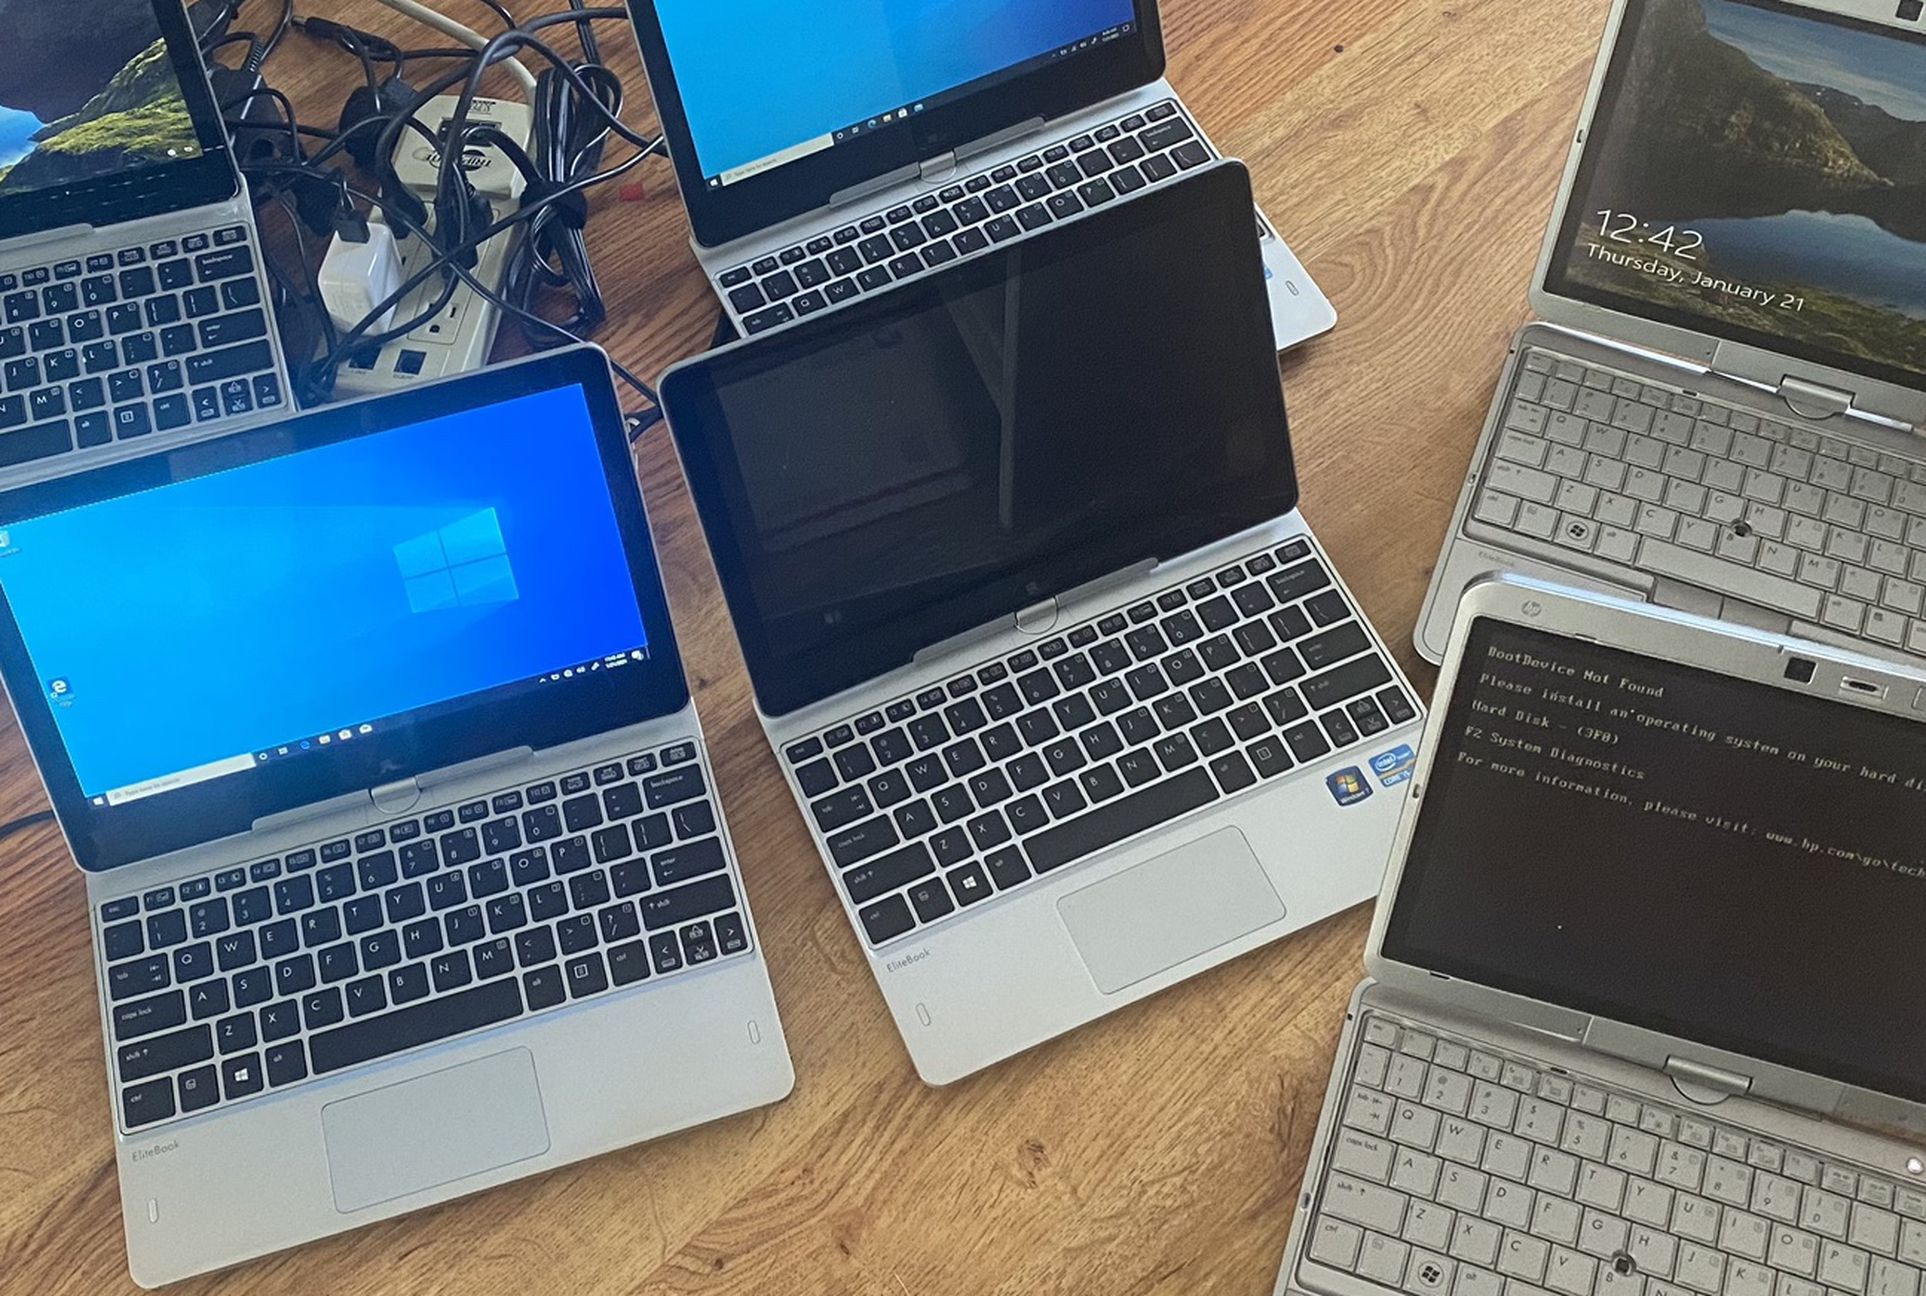 Lot 6 laptops with issues hp revolve/hp Elitebook i5 touchscreen Ssd 128gb/HDD 500gb Ram 4gb